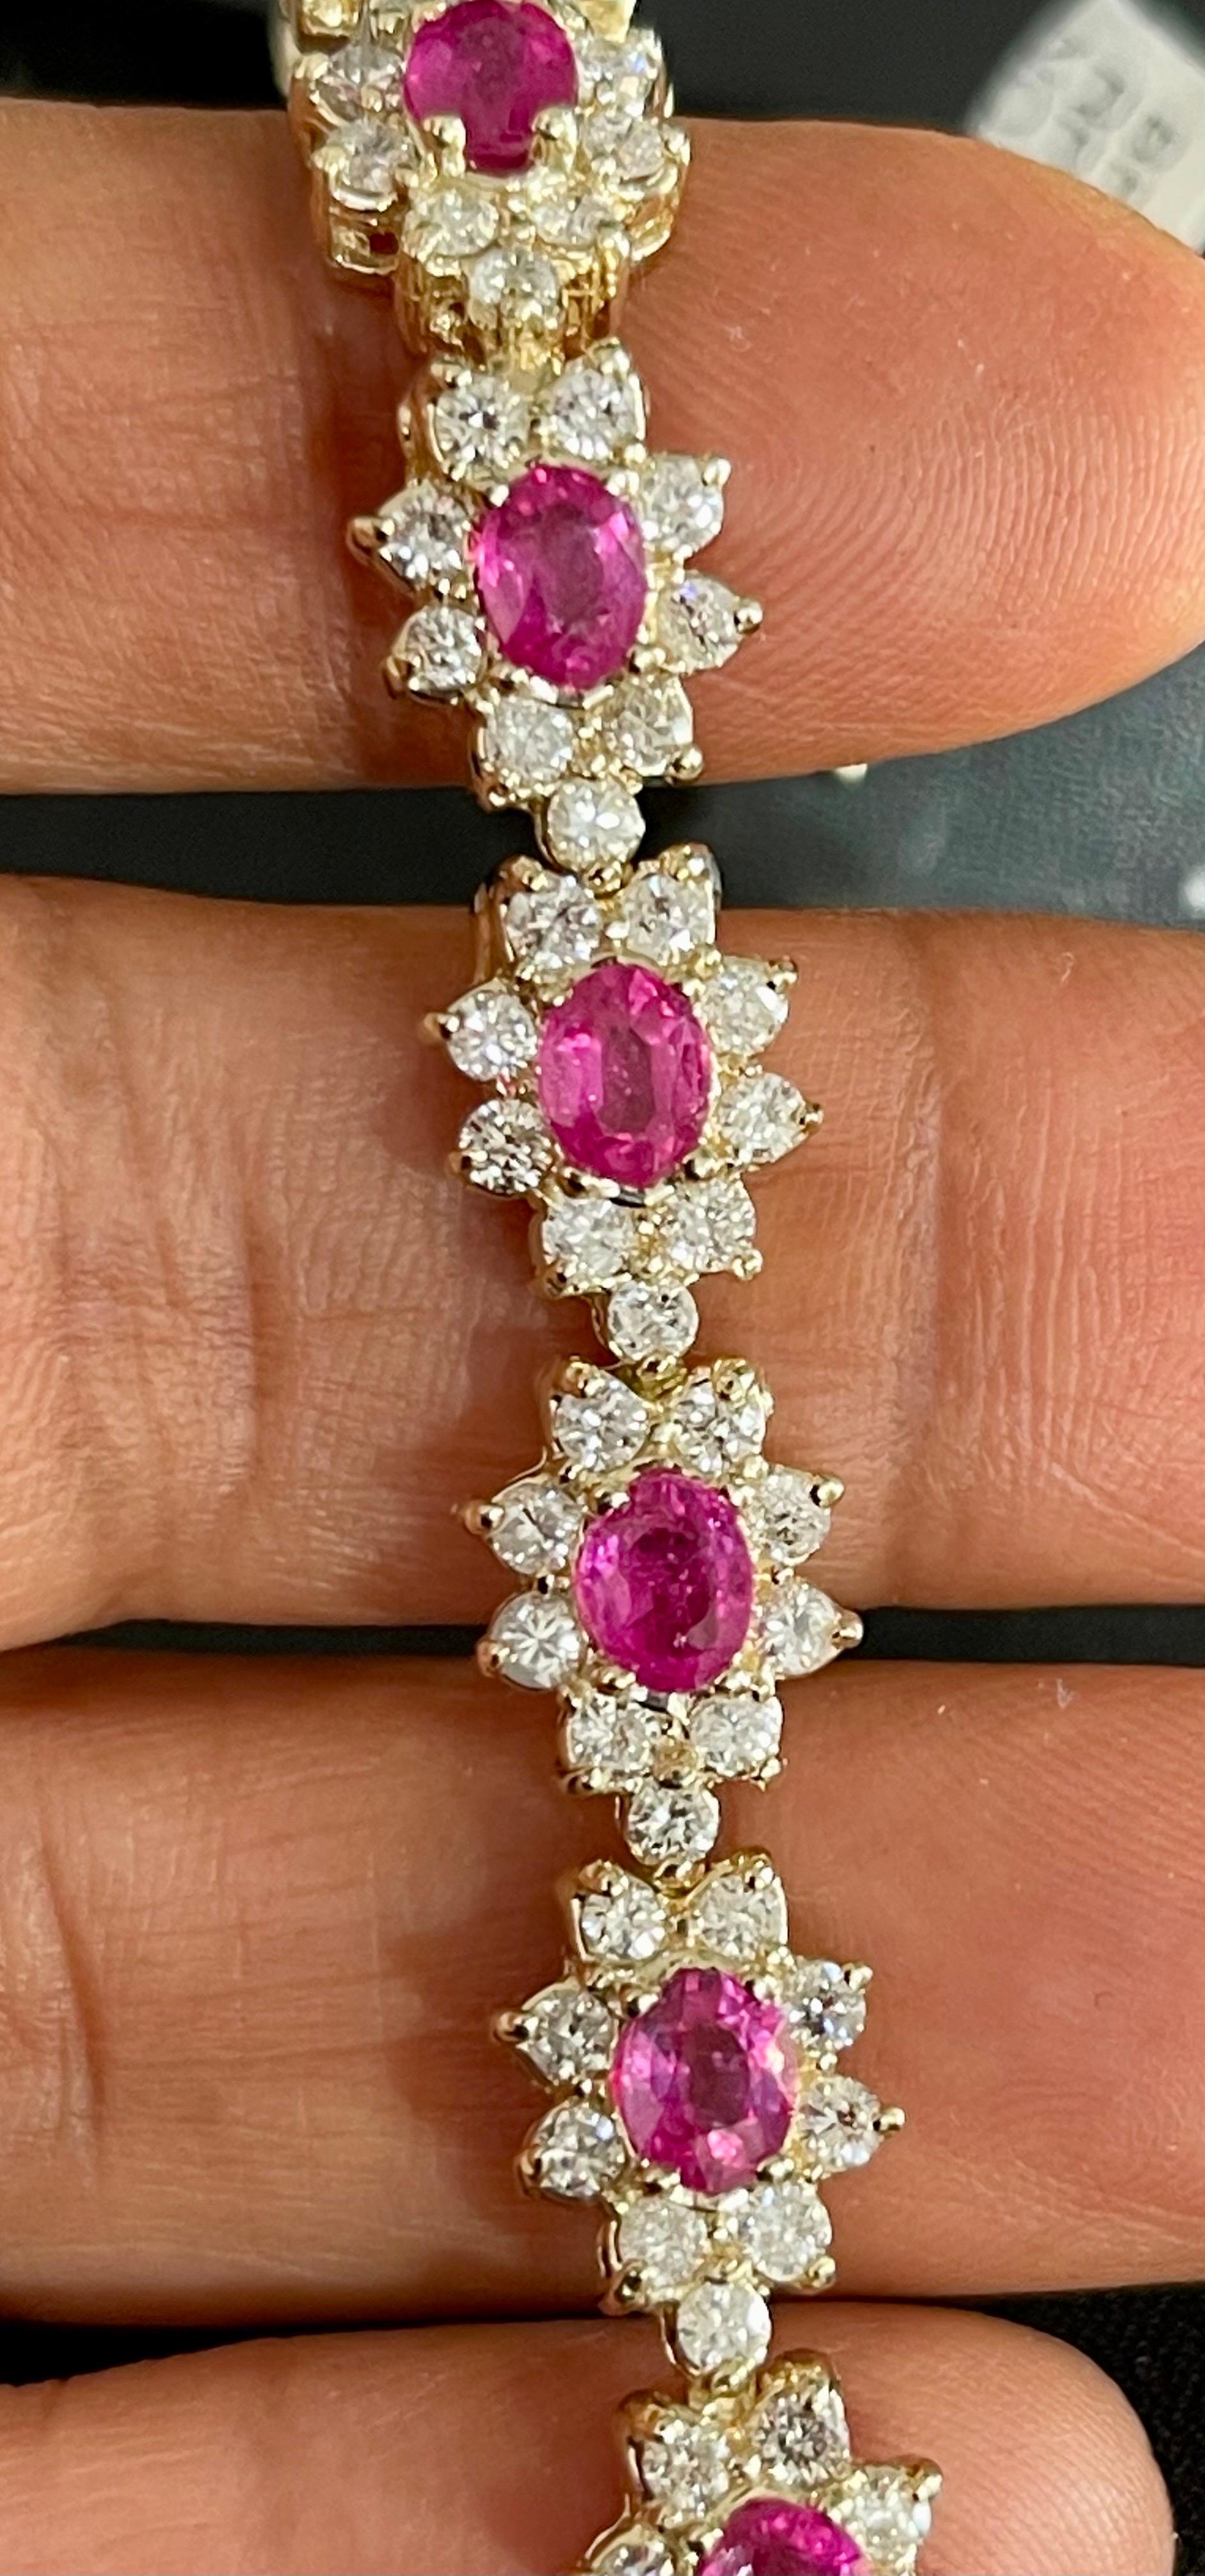 7 Carat Oval Cut Natural Ruby & Diamond Tennis Bracelet 14kt Yellow Gold 24.5 G In Excellent Condition For Sale In New York, NY